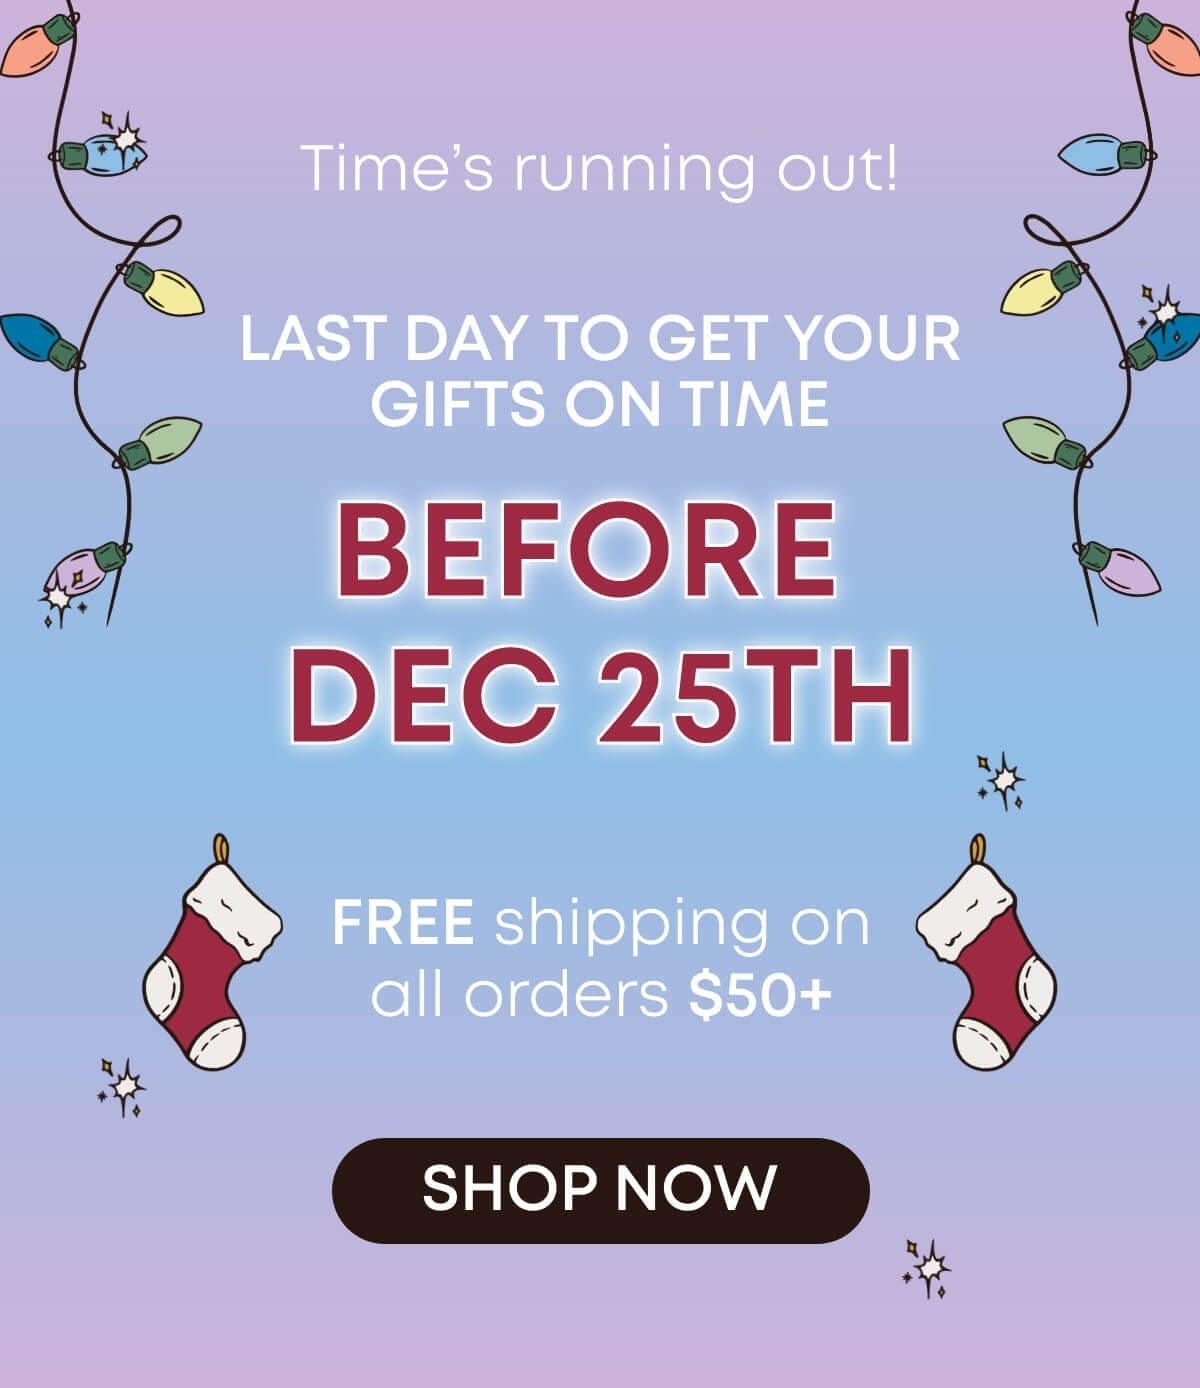 Holiday shipping deadline